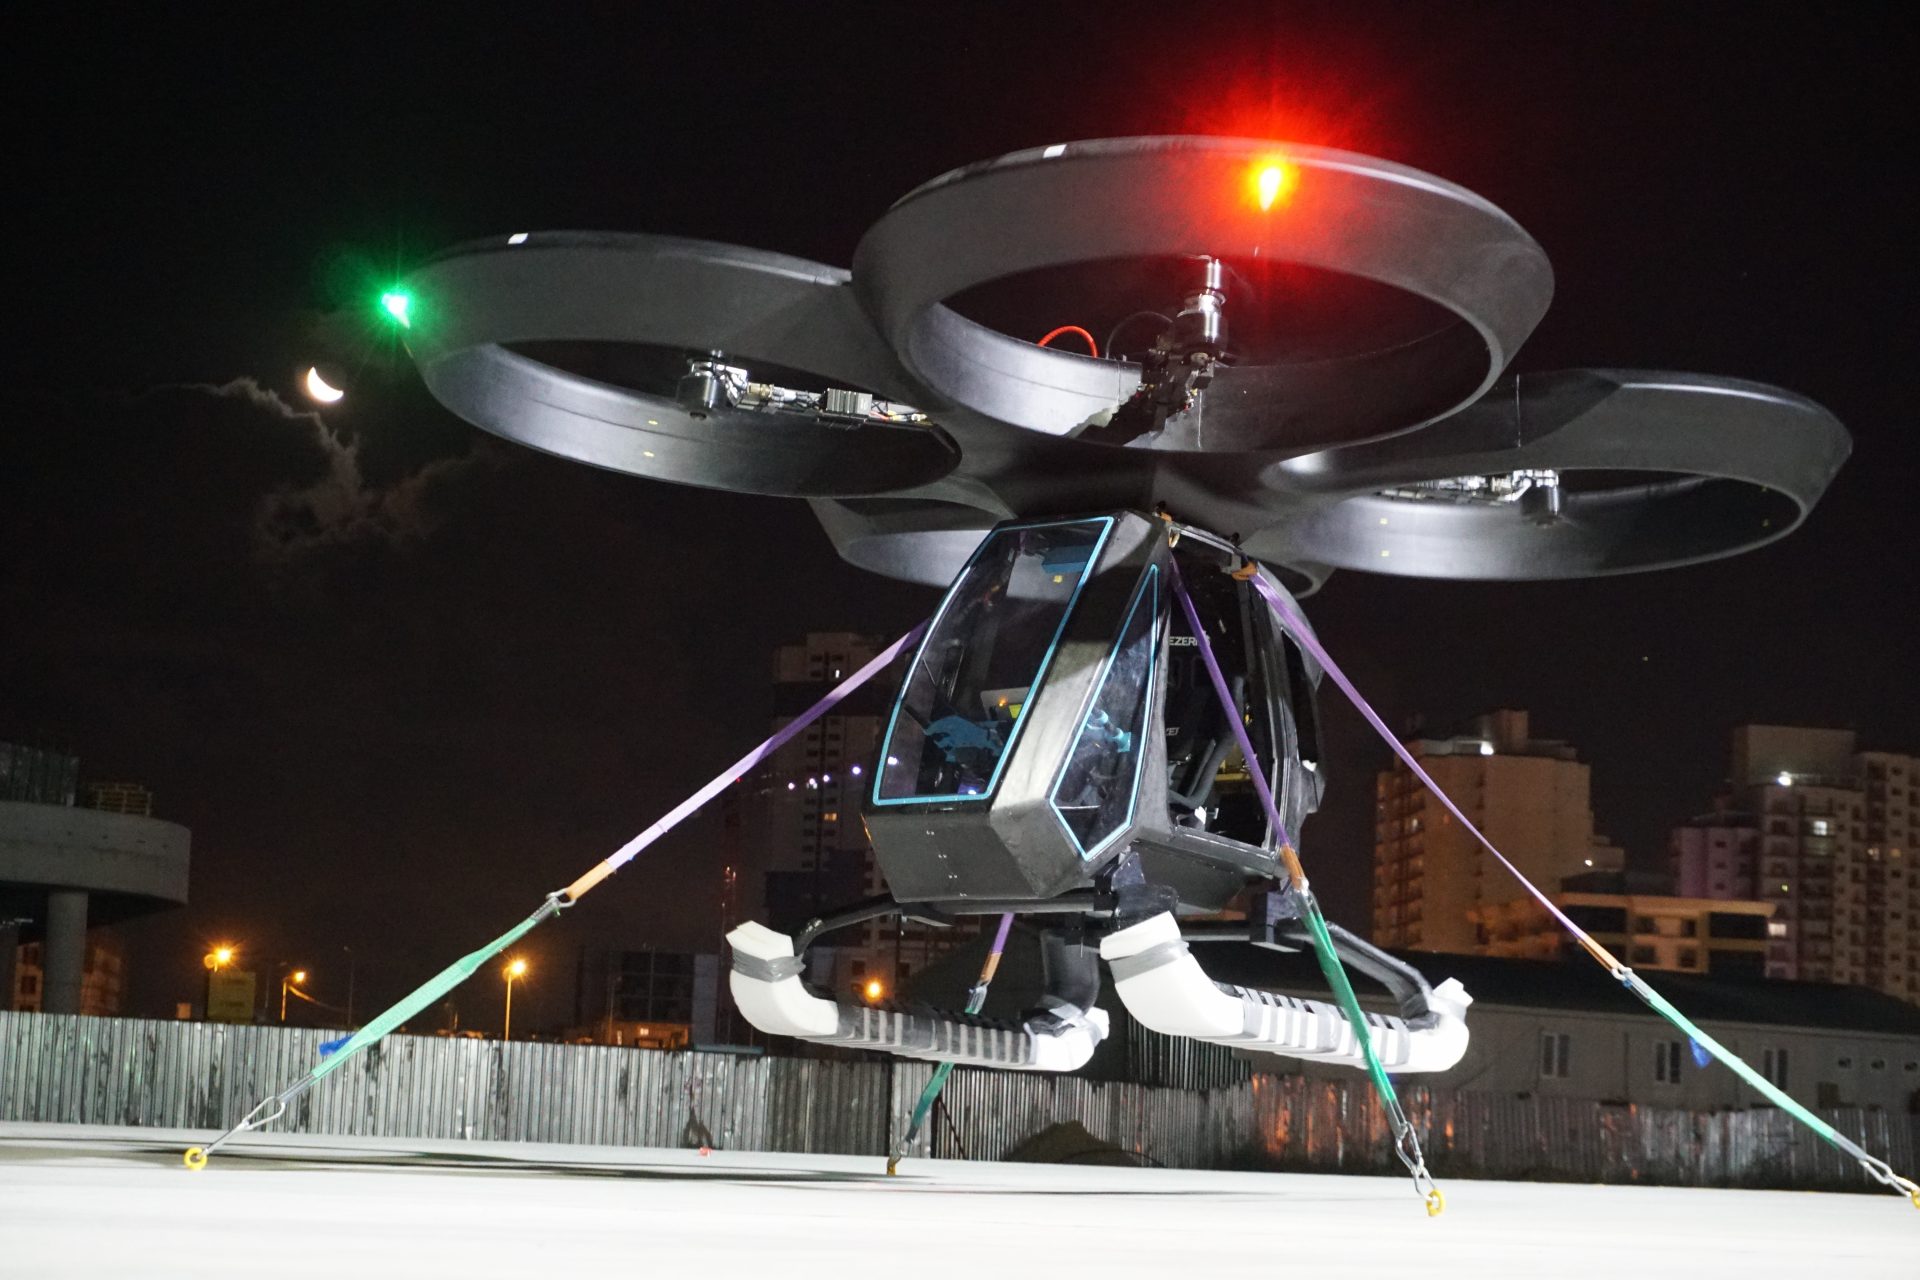 Flying cars could be just around the corner, but will they take off?